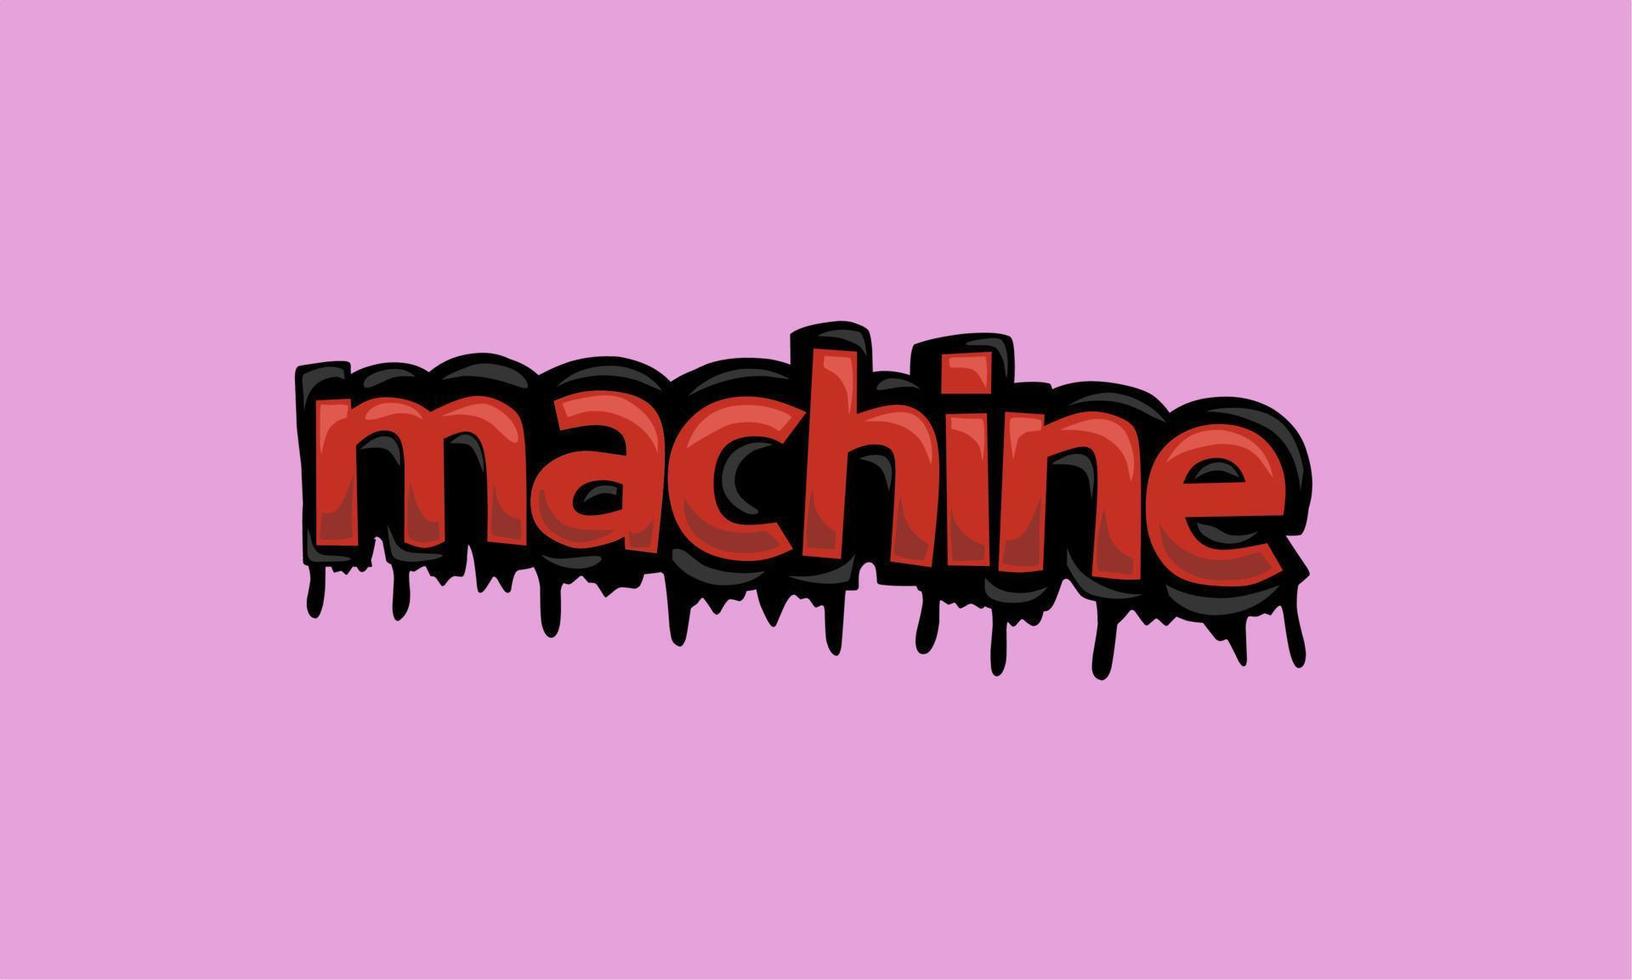 MACHINE writing vector design on pink background